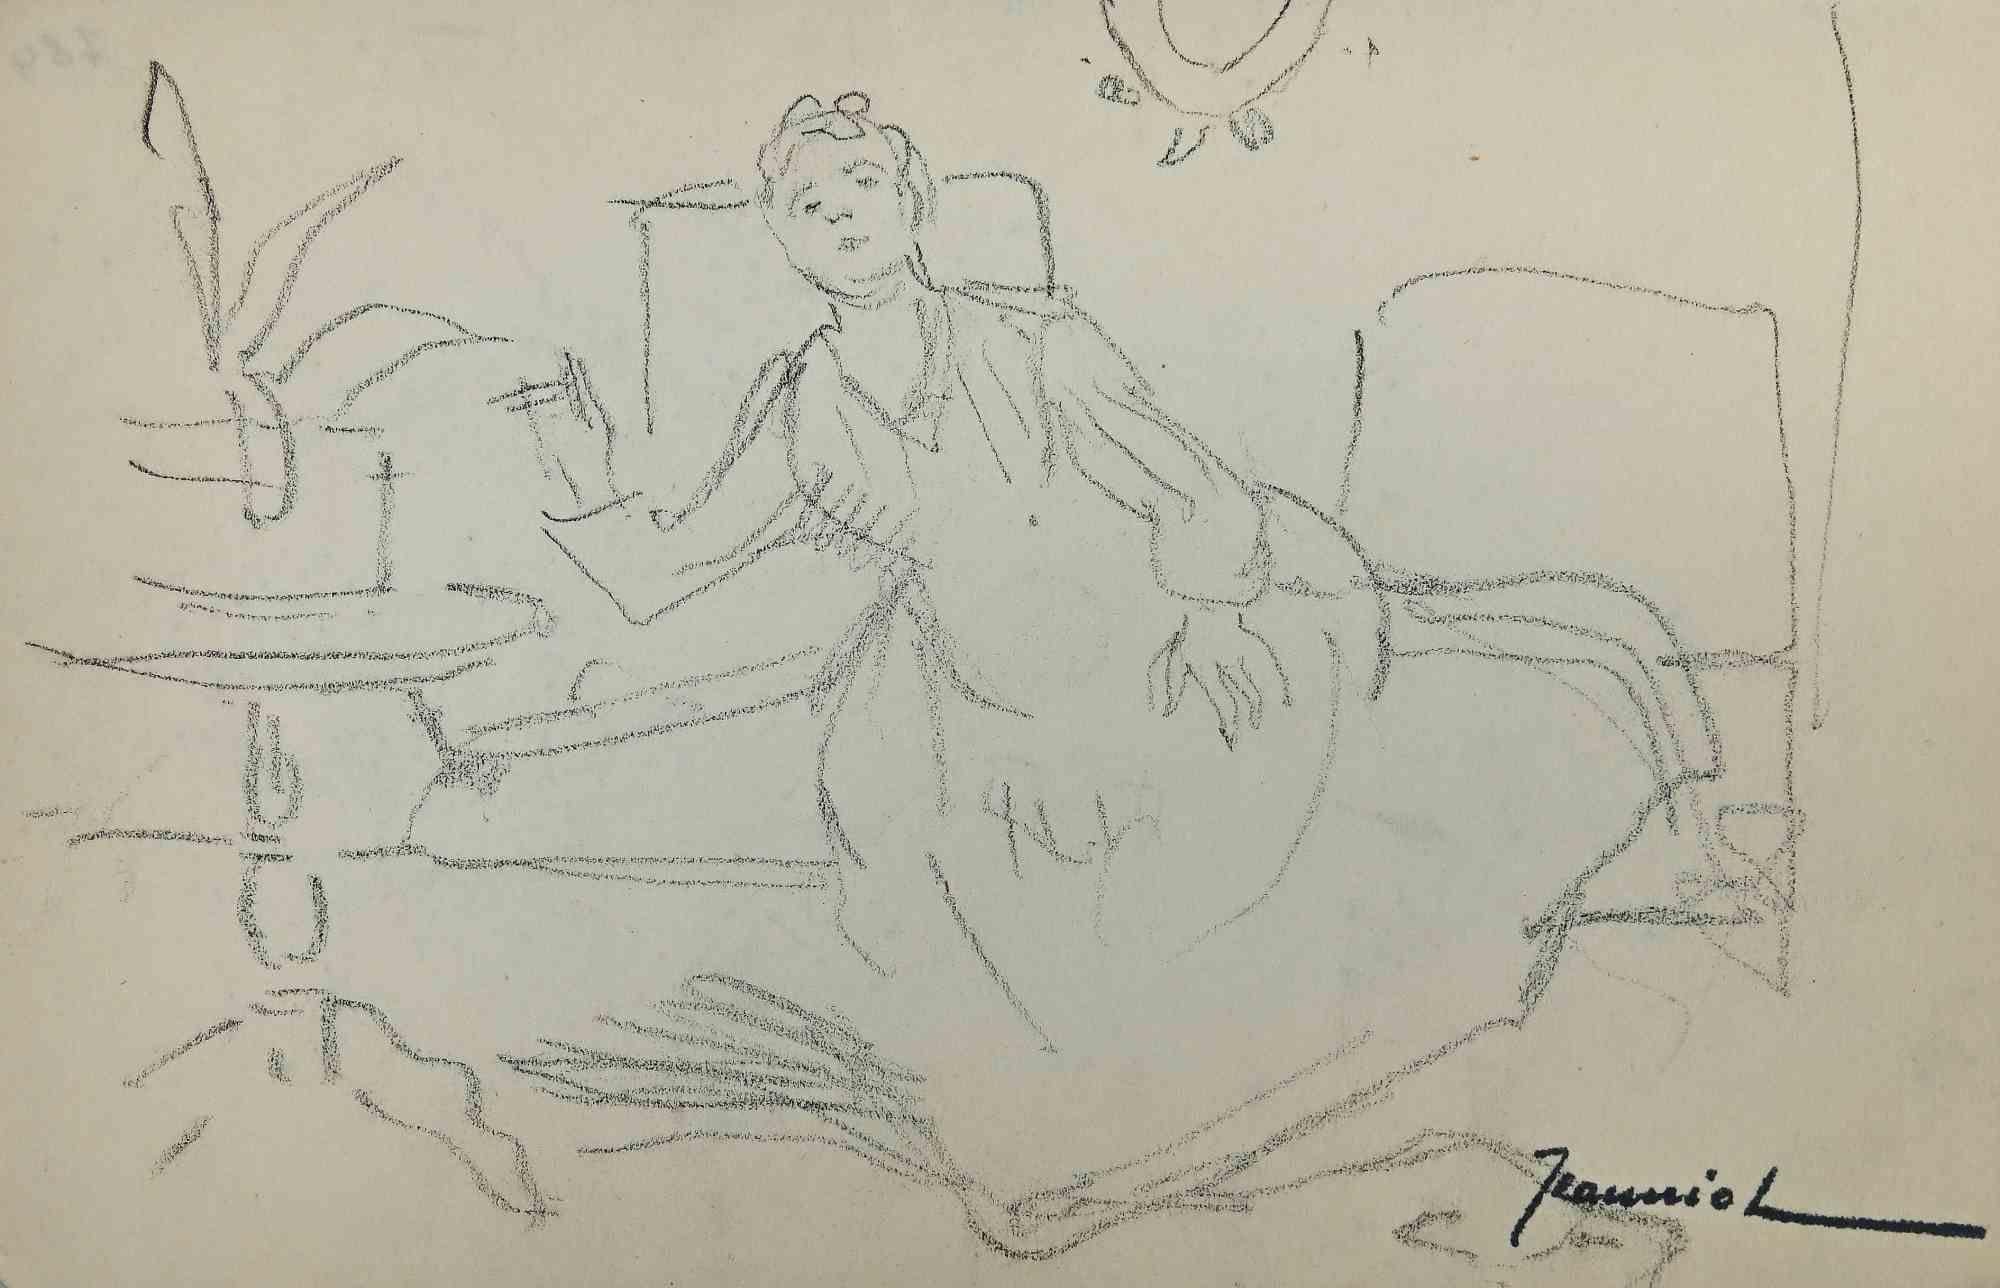 Woman is an original Drawing on paper realized by the painter Pierre Georges Jeanniot (1848-1934).

Drawing in charcoal.

Hand-signed on the lower.

Good conditions except for aged margins.

The artwork is represented through deft and quick strokes